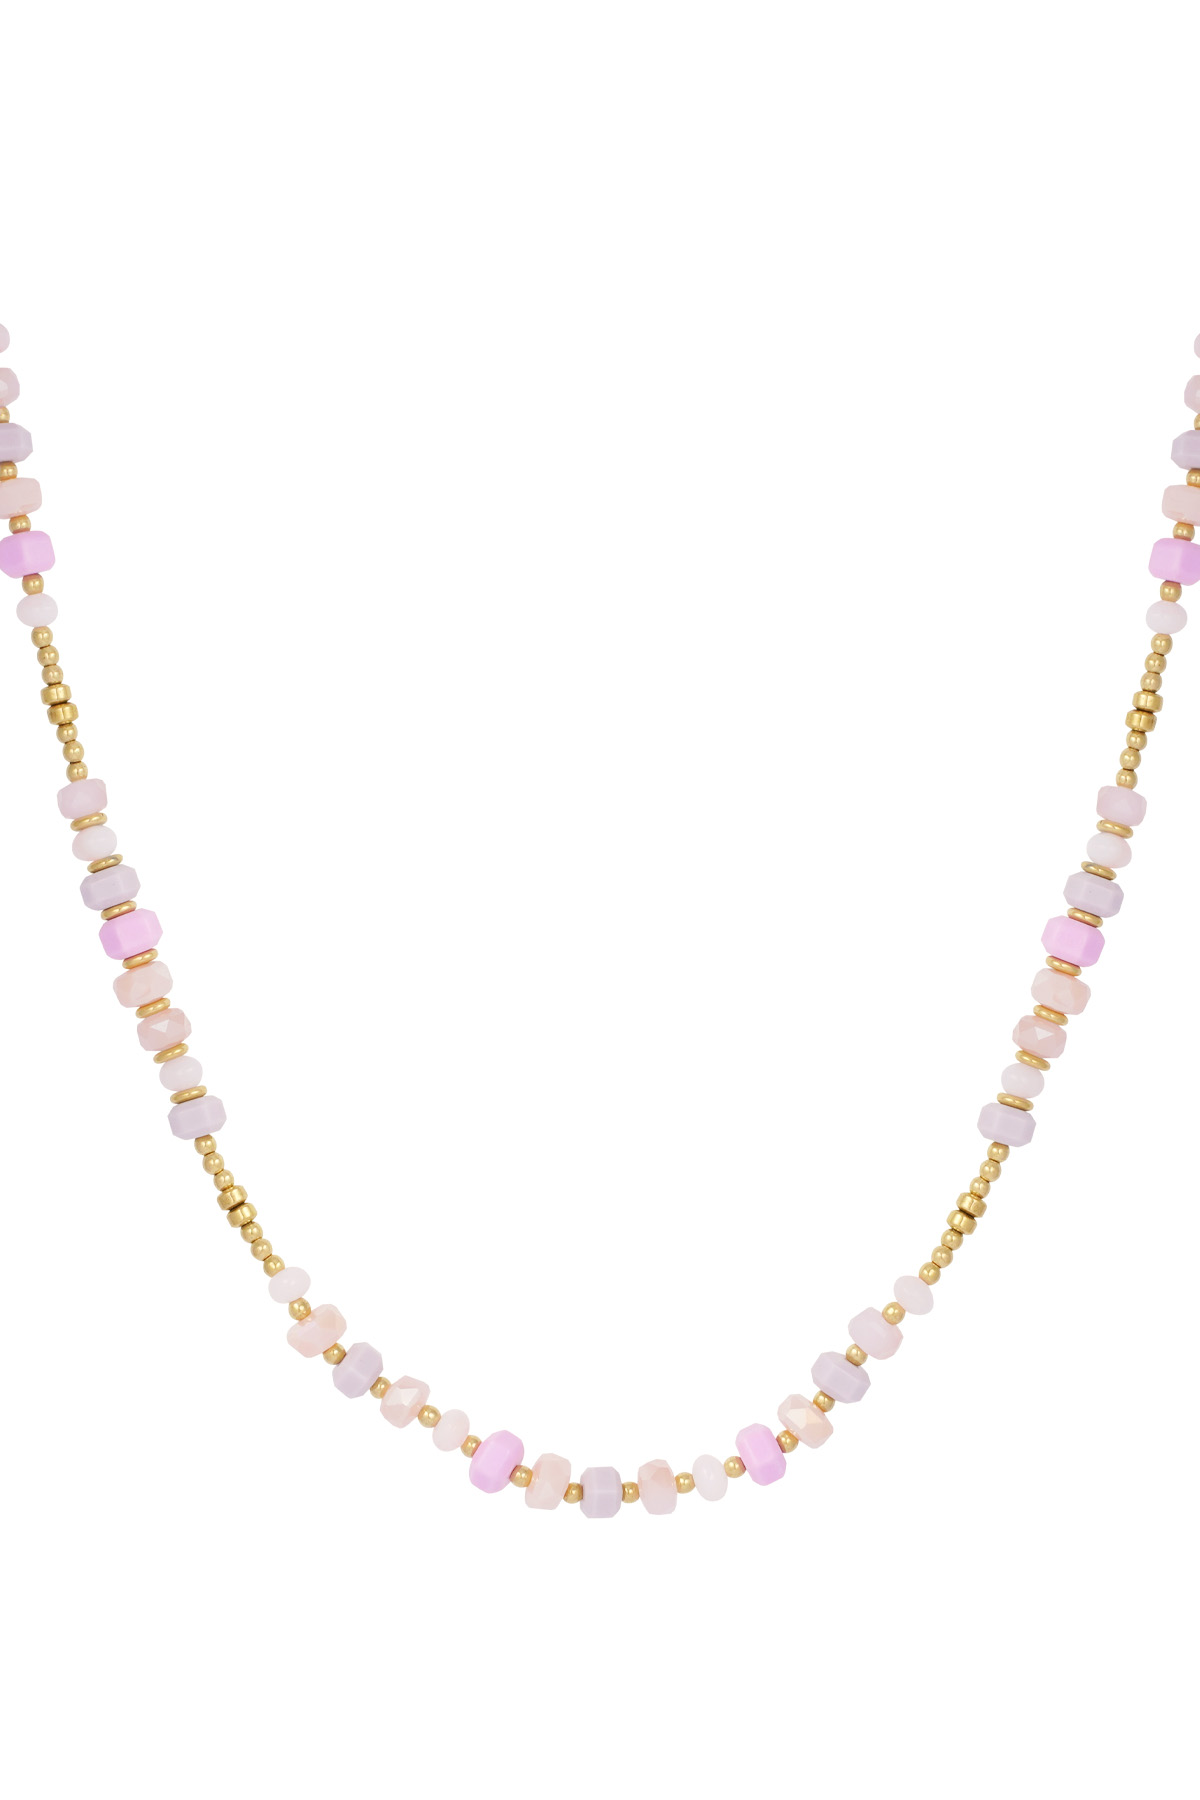 Necklace colorful wrap - pink/gold 